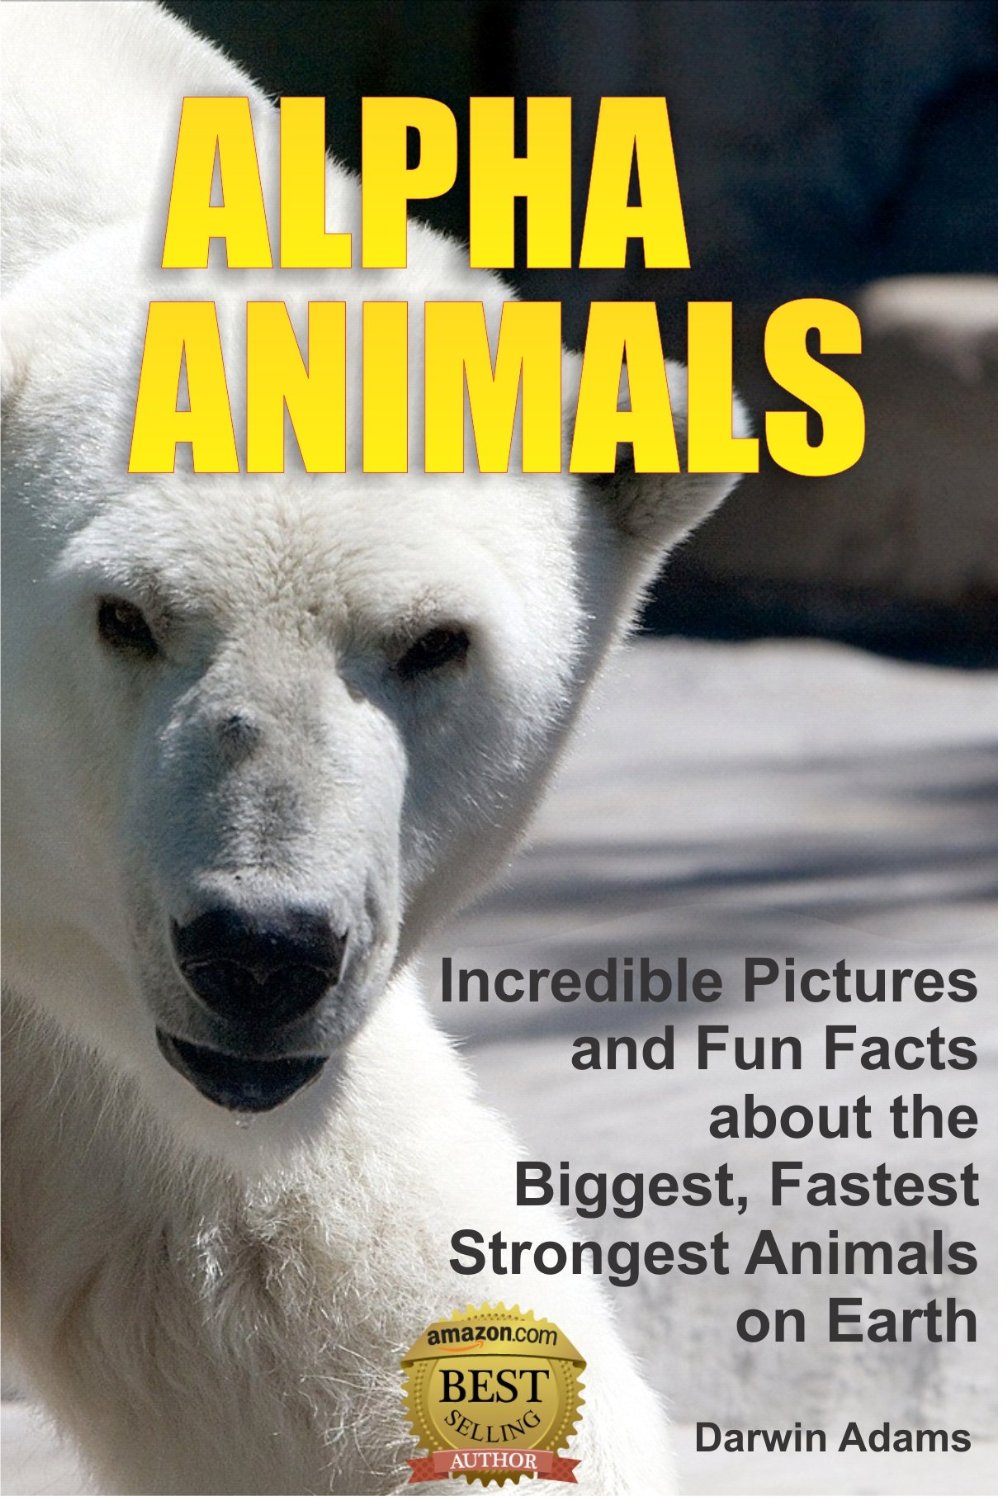 ALPHA ANIMALS: Incredible Pictures and Fun Facts about the Biggest, Fastest, Strongest Creatures on Earth by Darwin Adams